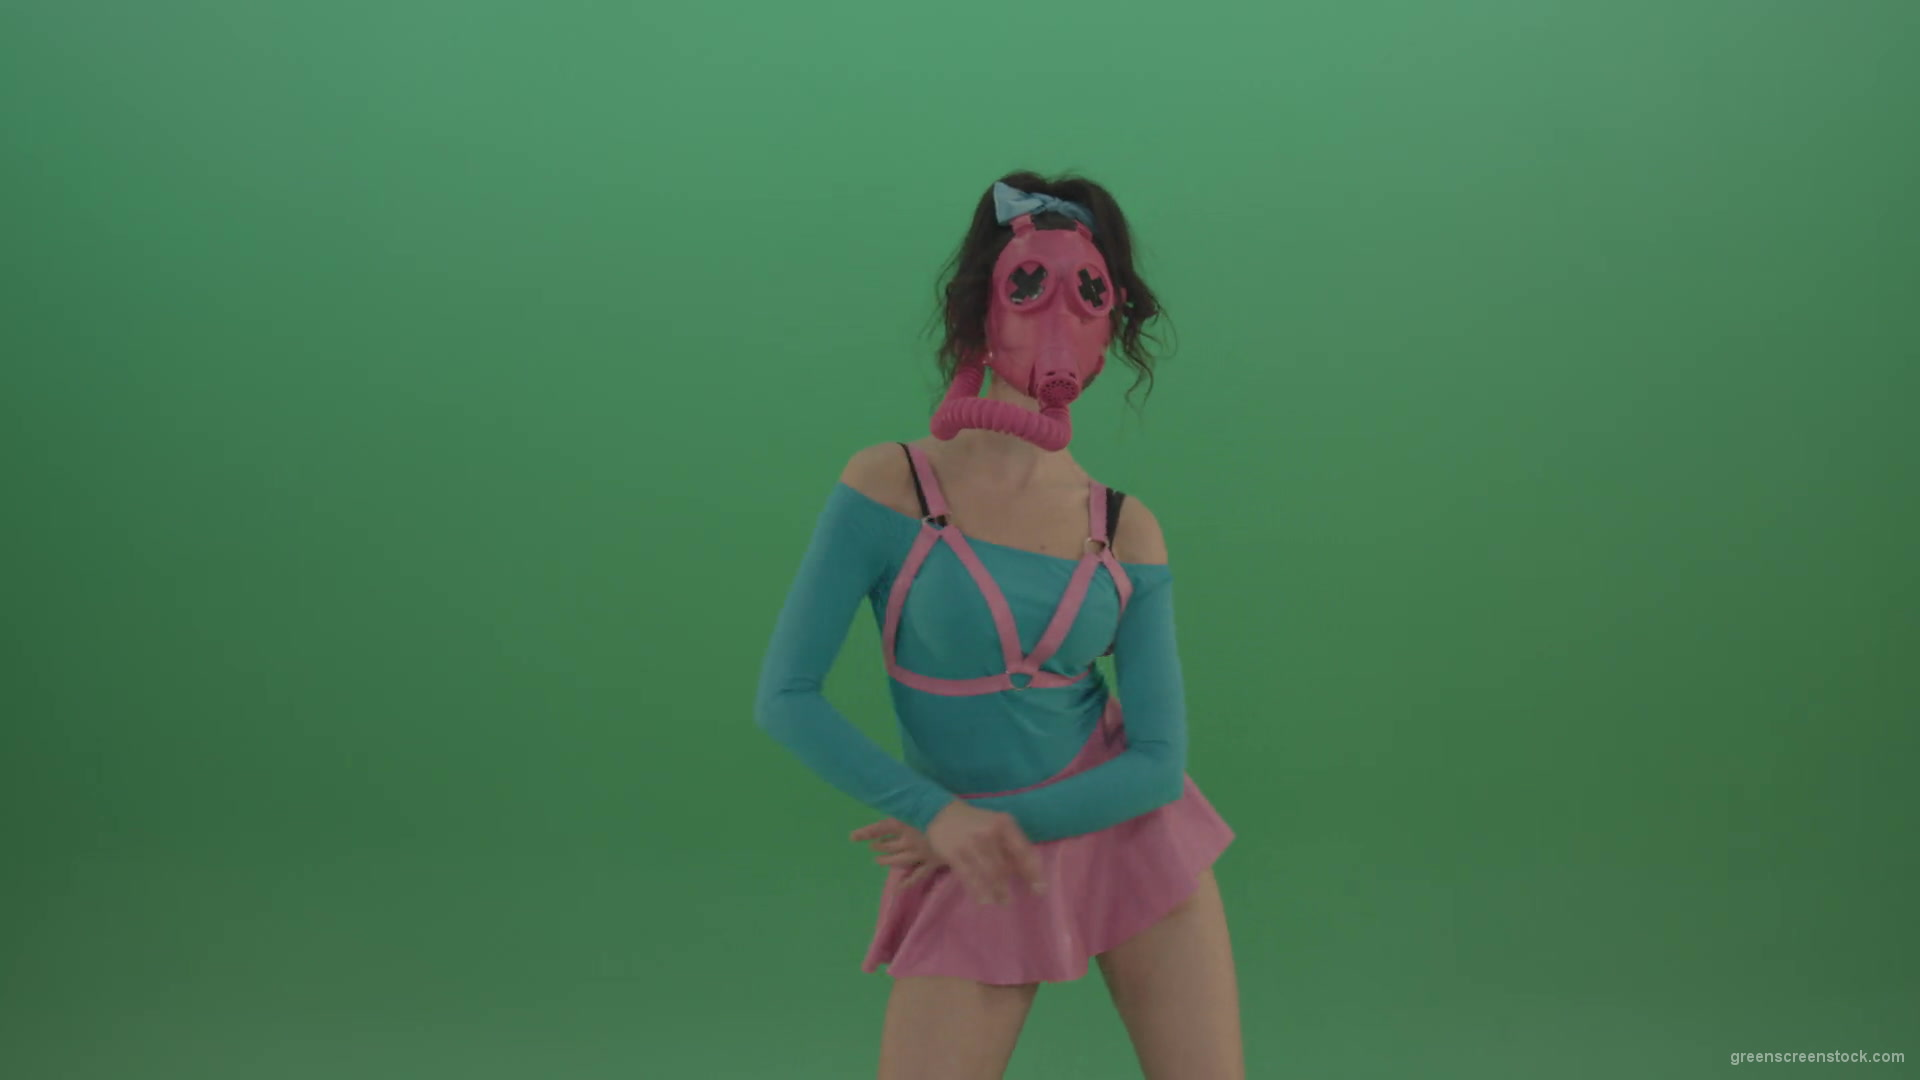 Go-Go-Dancing-Woman-in-Pink-Gas-Mask-sexy-moving-on-green-screen-4K-Video-Footage-1920_009 Green Screen Stock